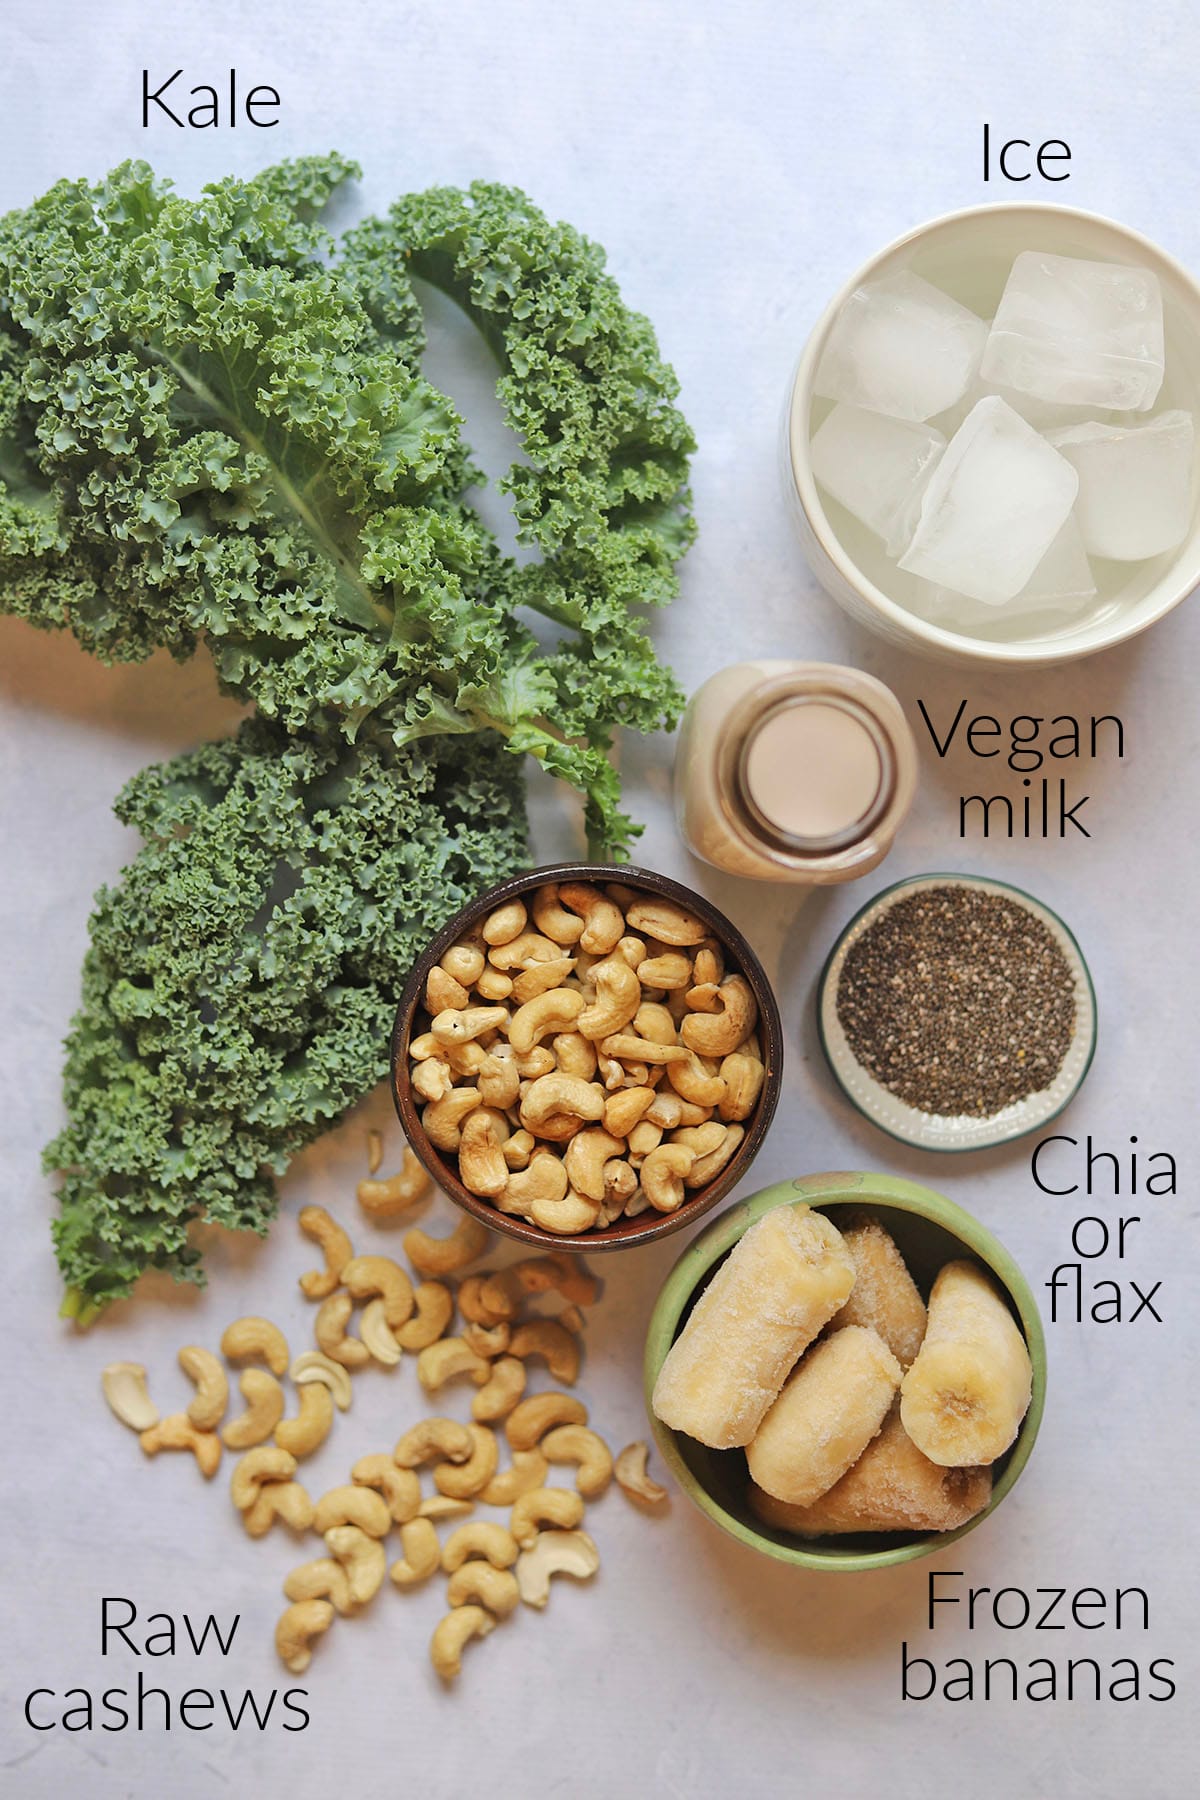 Labeled ingredients for kale banana smoothie.